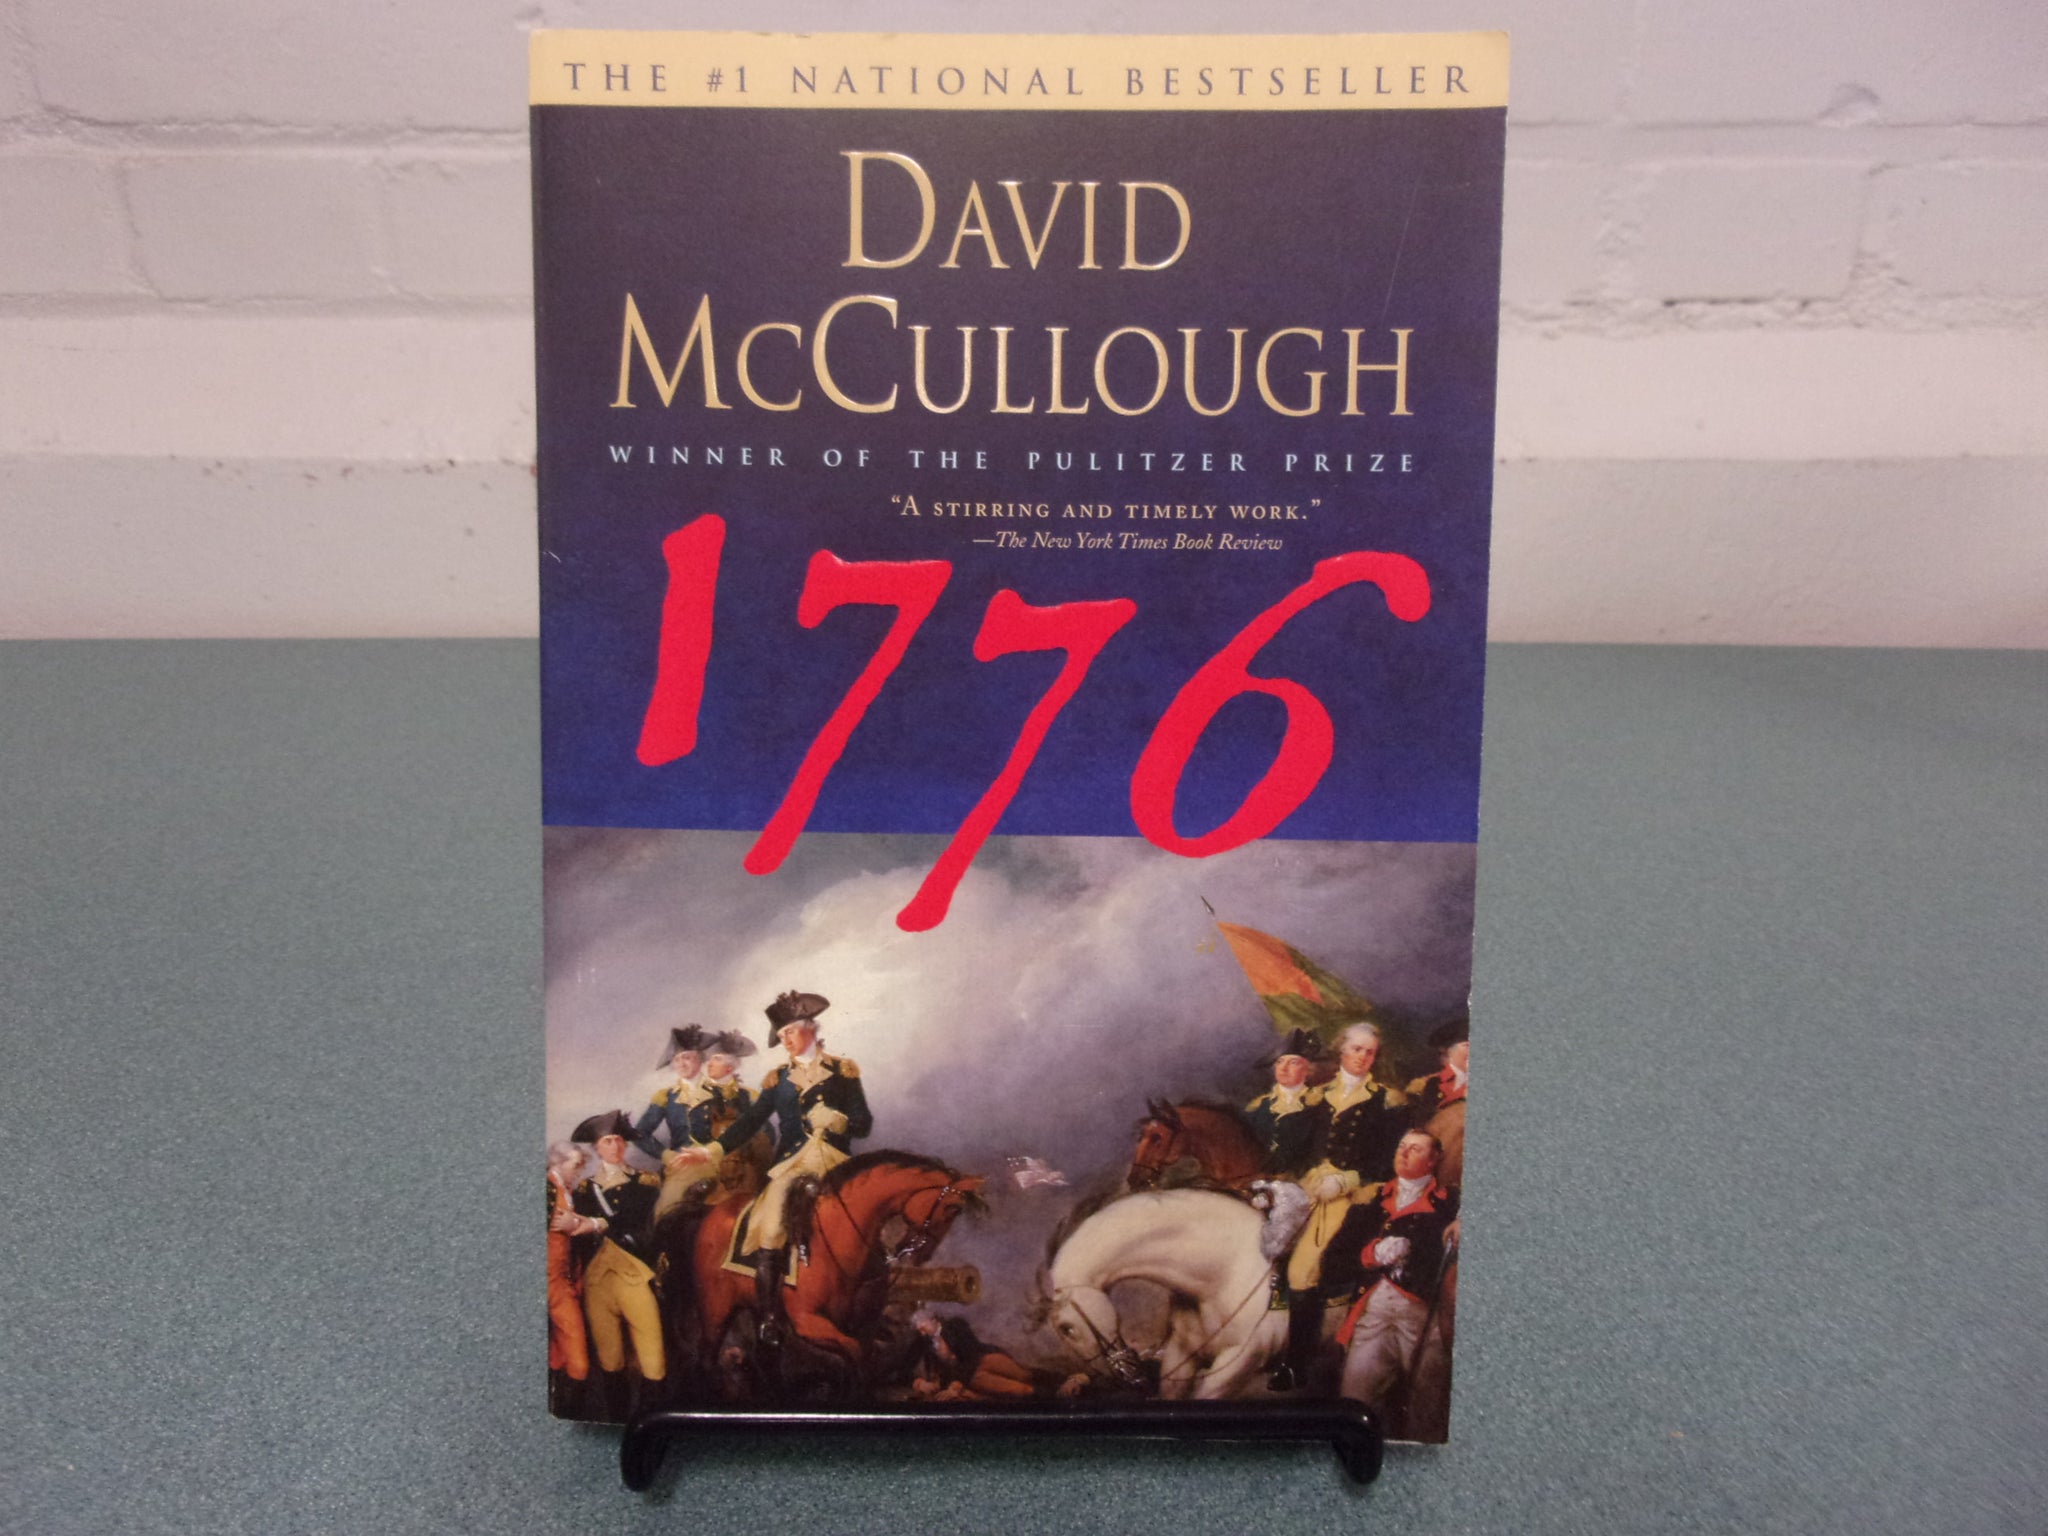 book review of 1776 by david mccullough